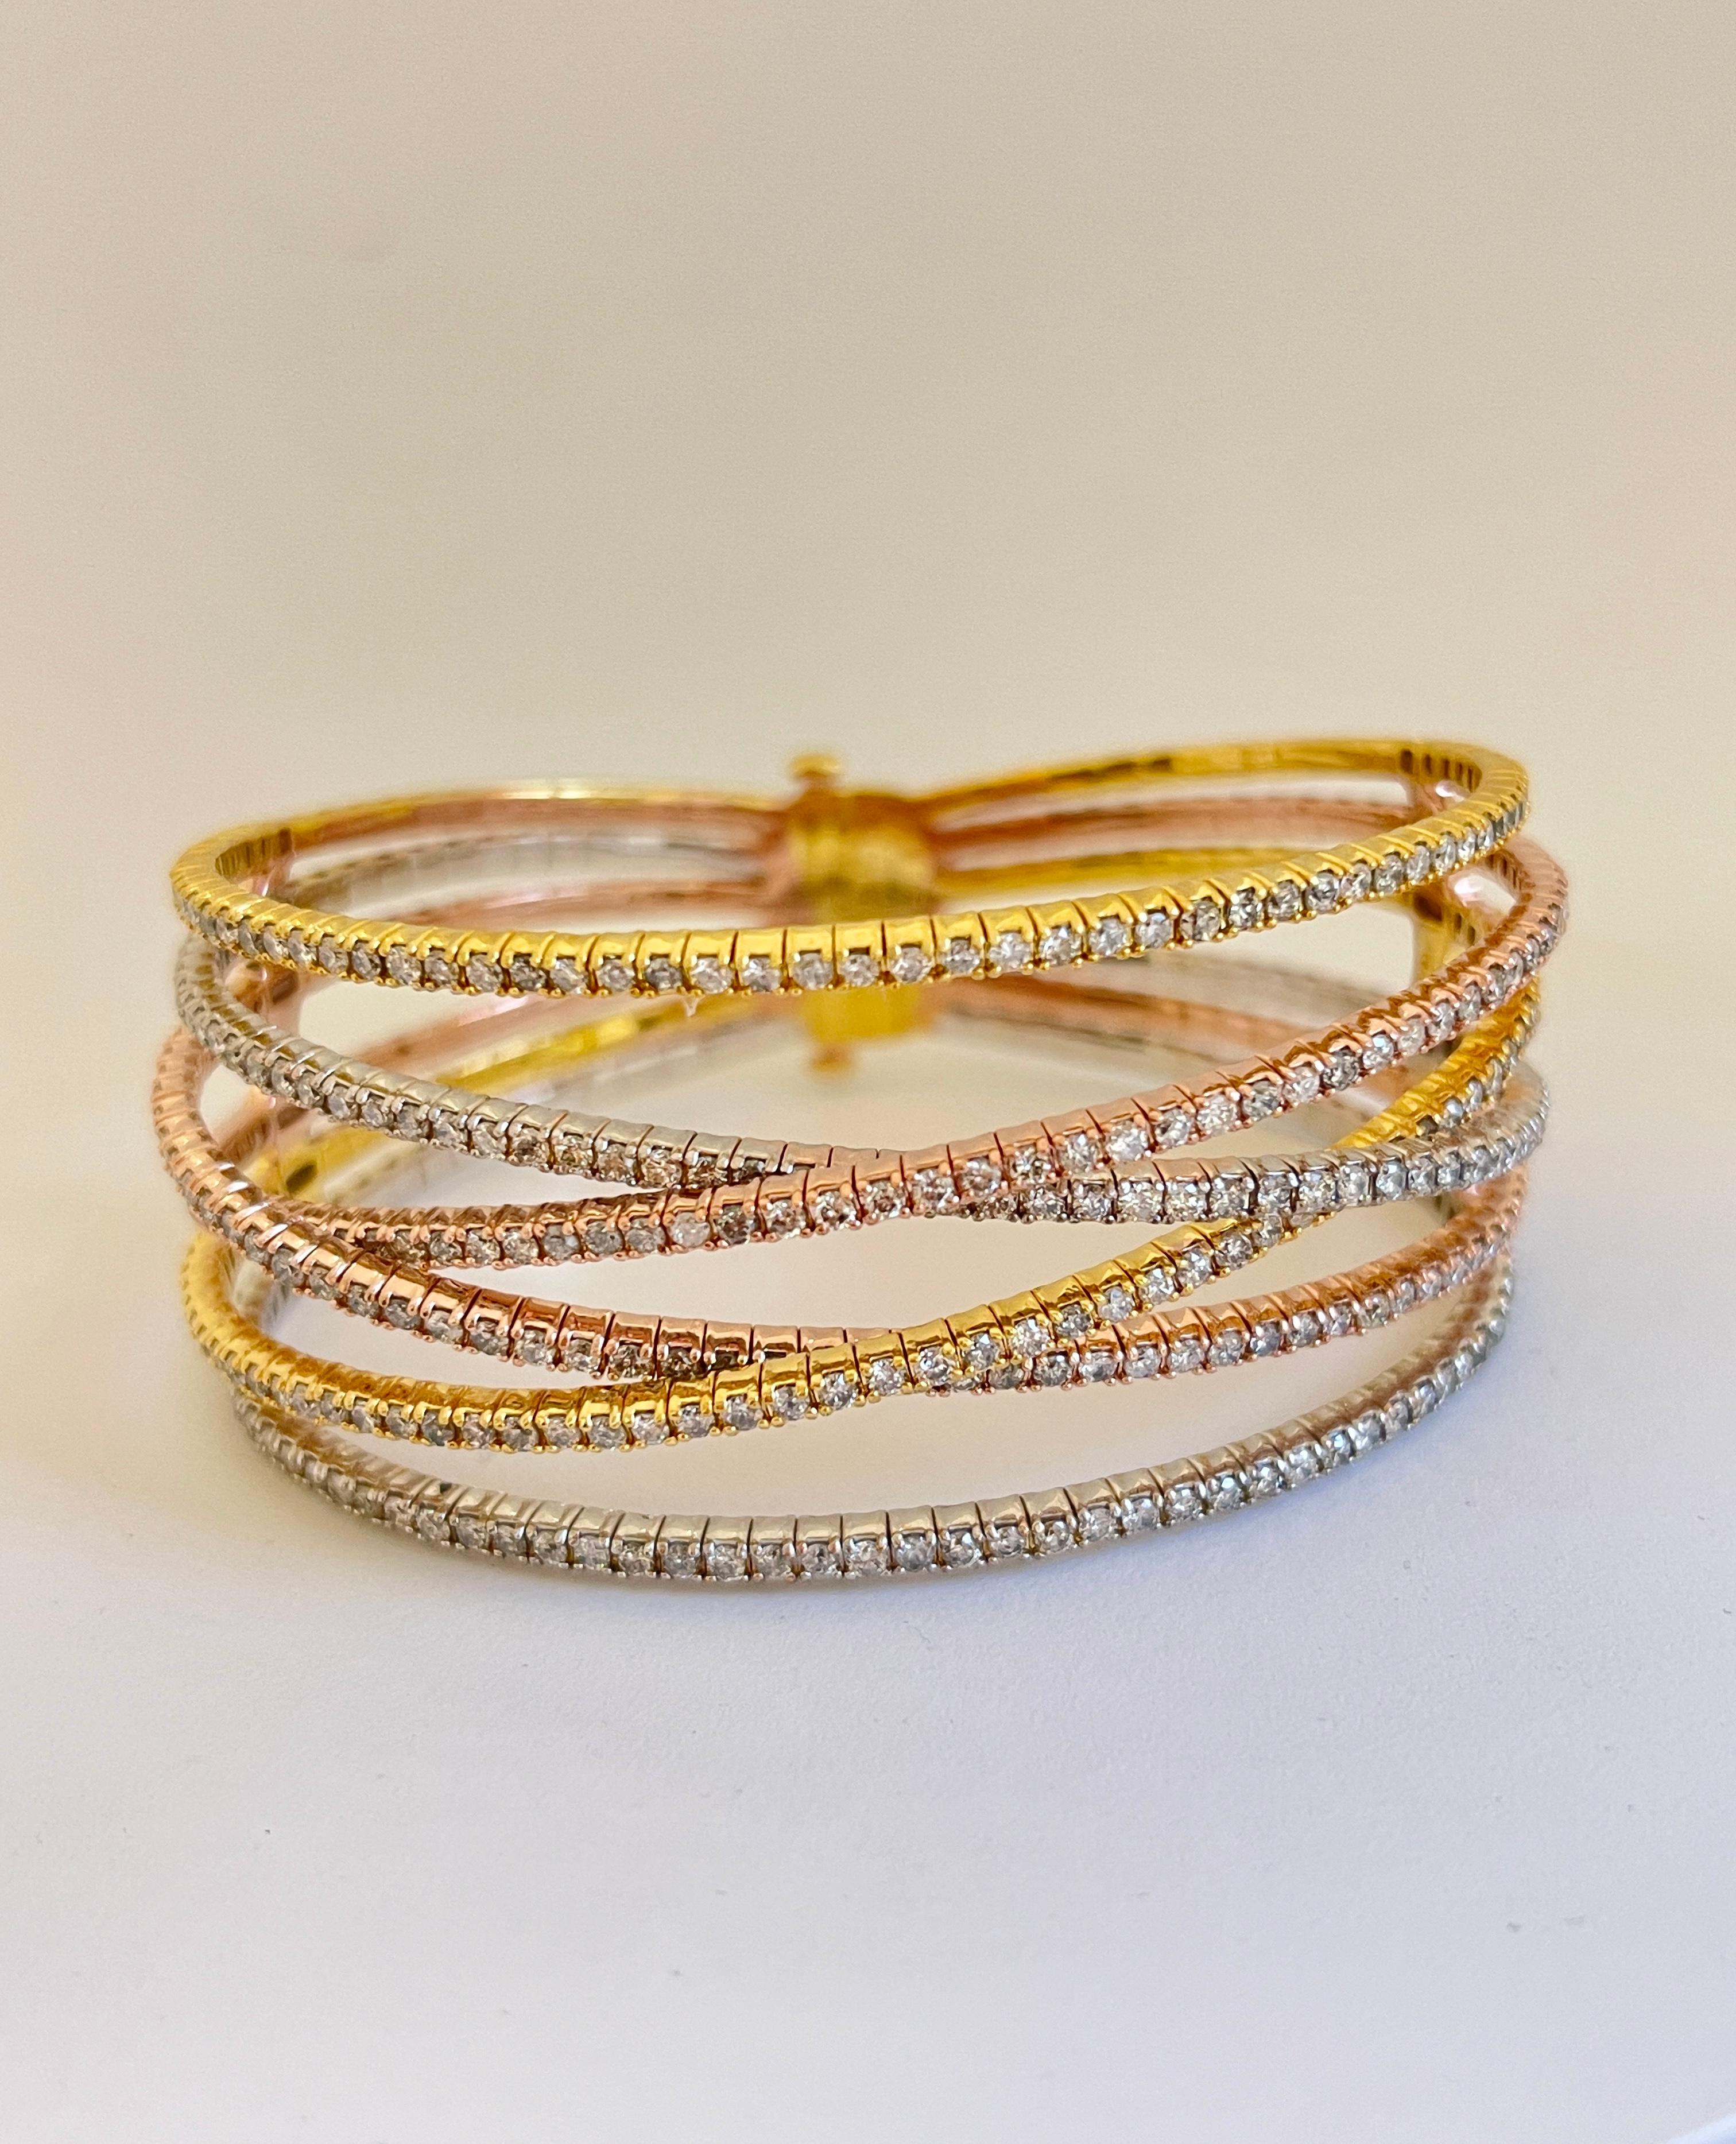 6.52 Carat Six Row Natural Diamonds Mini Bangle Bracelet Round-Brilliant Cut  14k Tri-Color Gold. 7 Inches, 322 pcs, 1 Inch Wide, Very Shiny 38.71grams

*Free shipping within U.S*